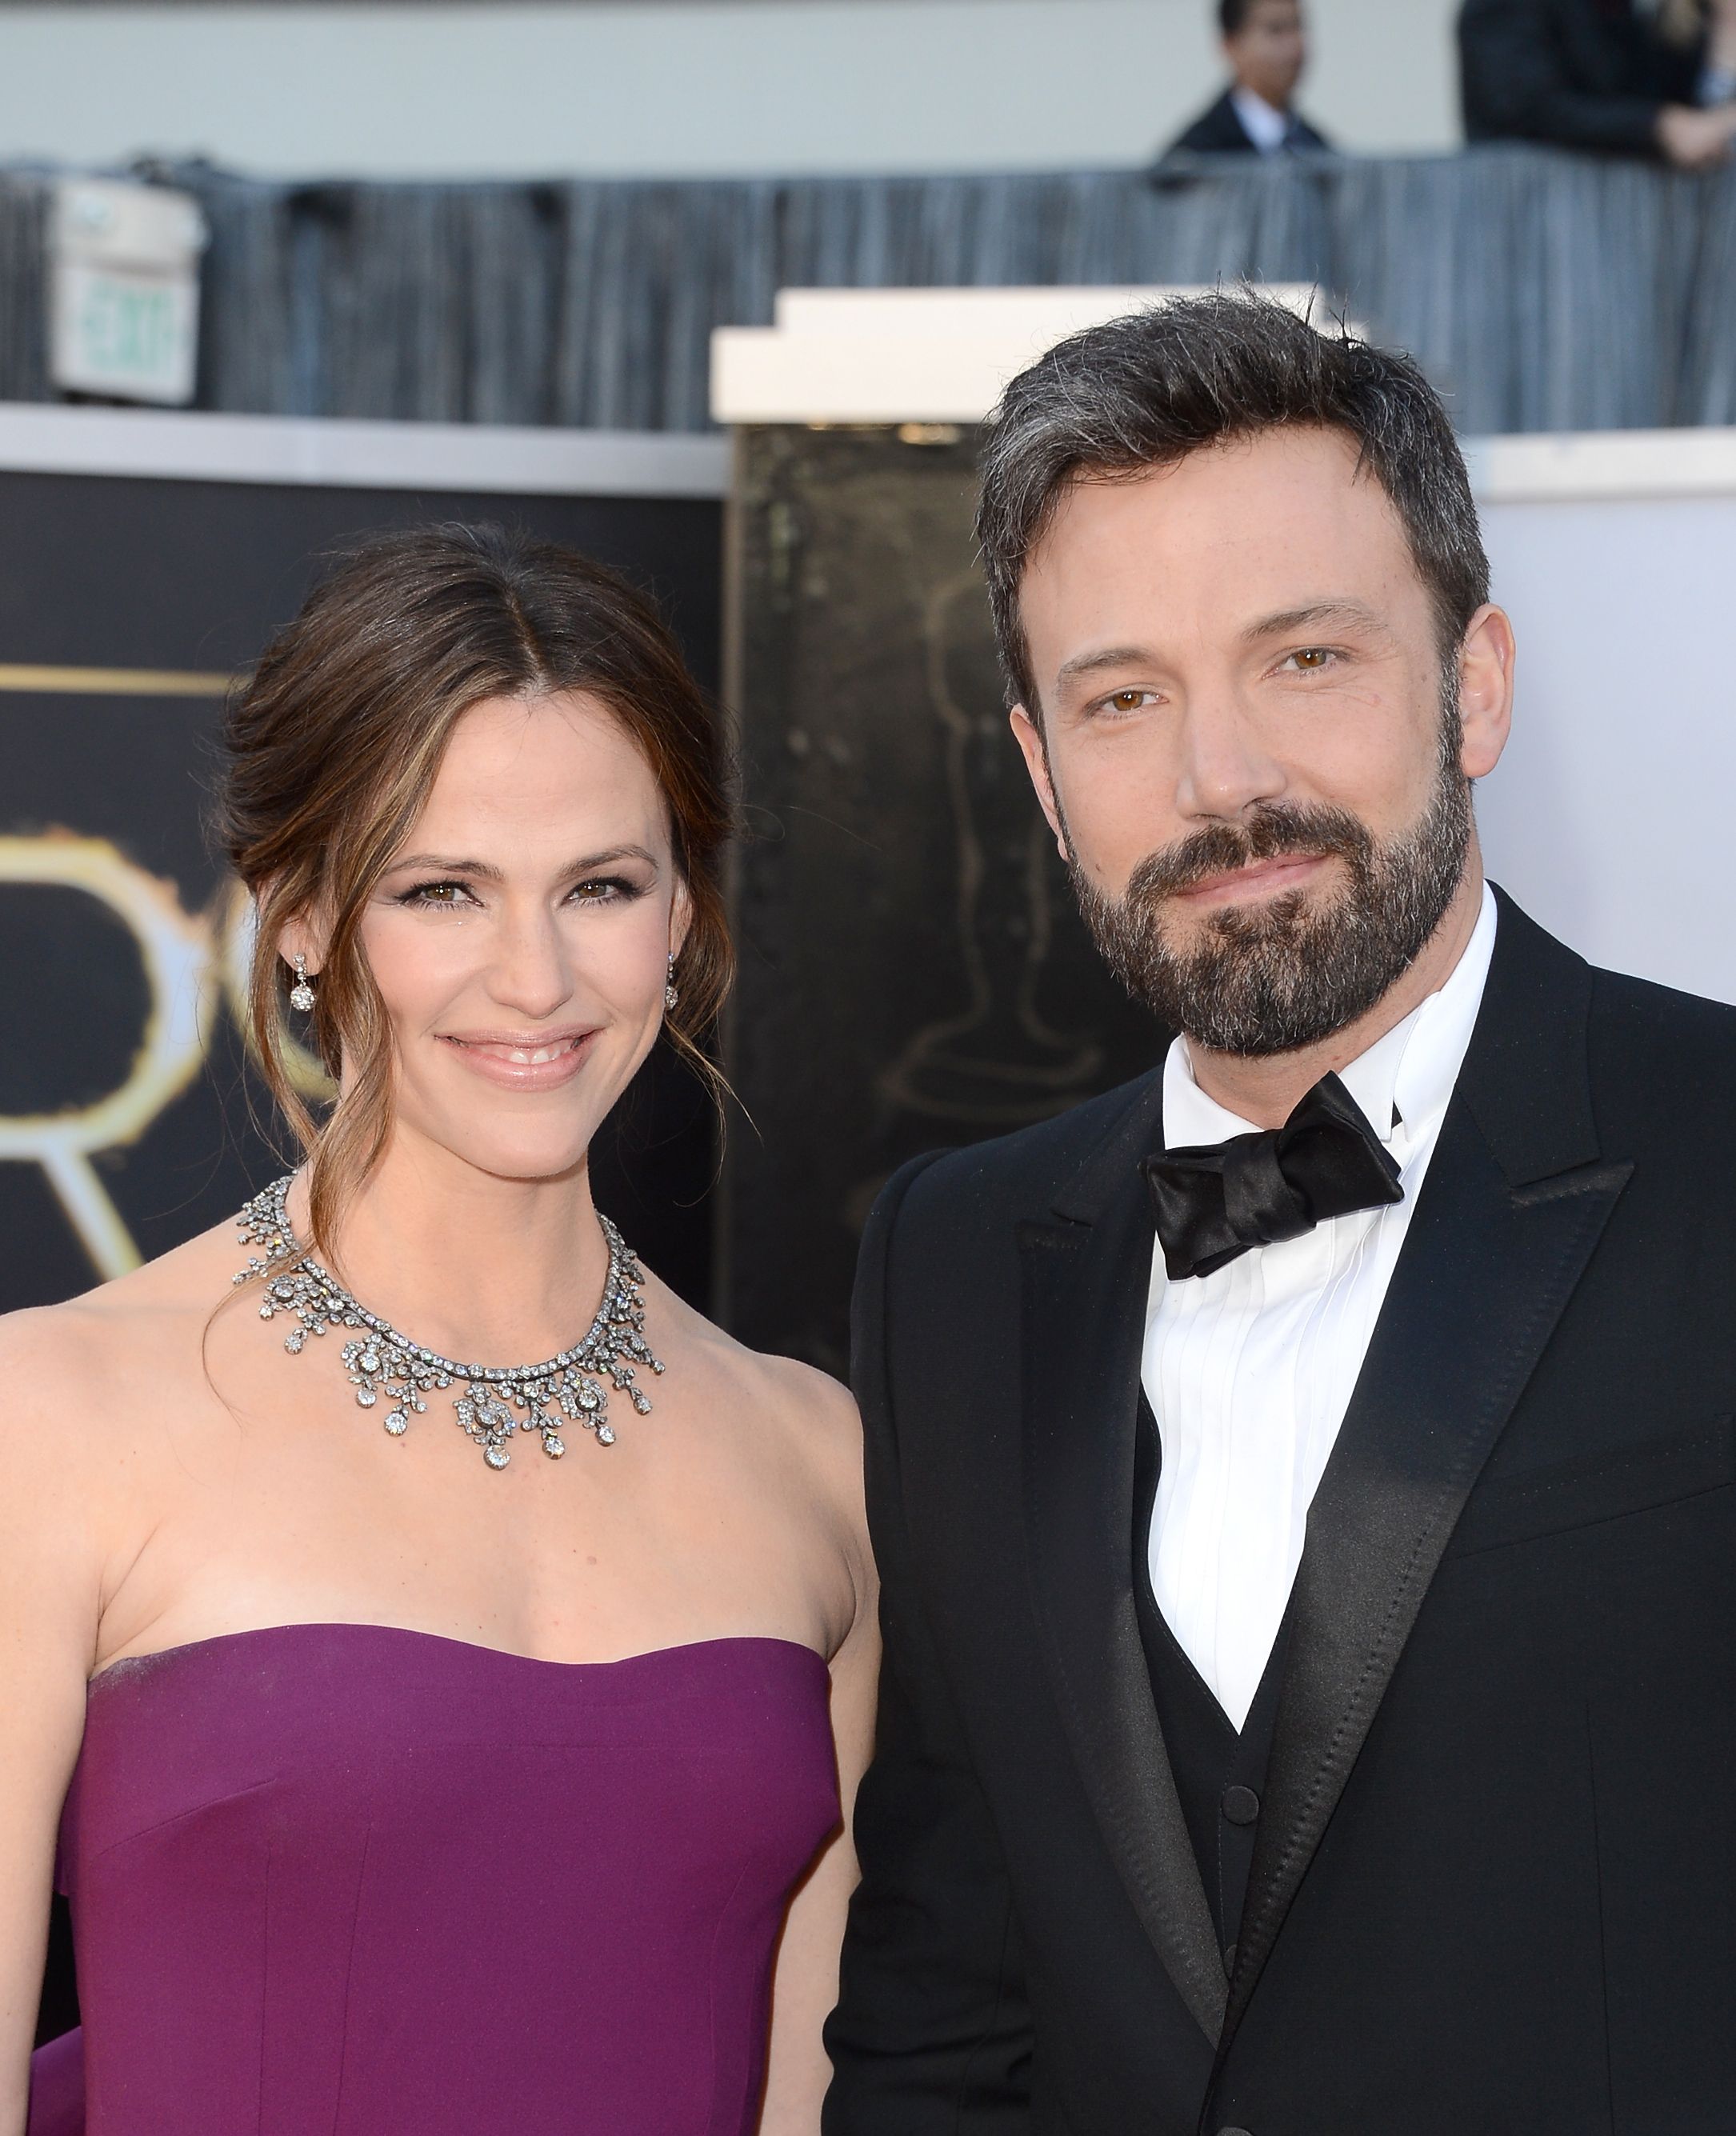 Jennifer Garner and Ben Affleck arrive at the Oscars at Hollywood & Highland Center on February 24, 2013 in Hollywood, California | Source: Getty Images